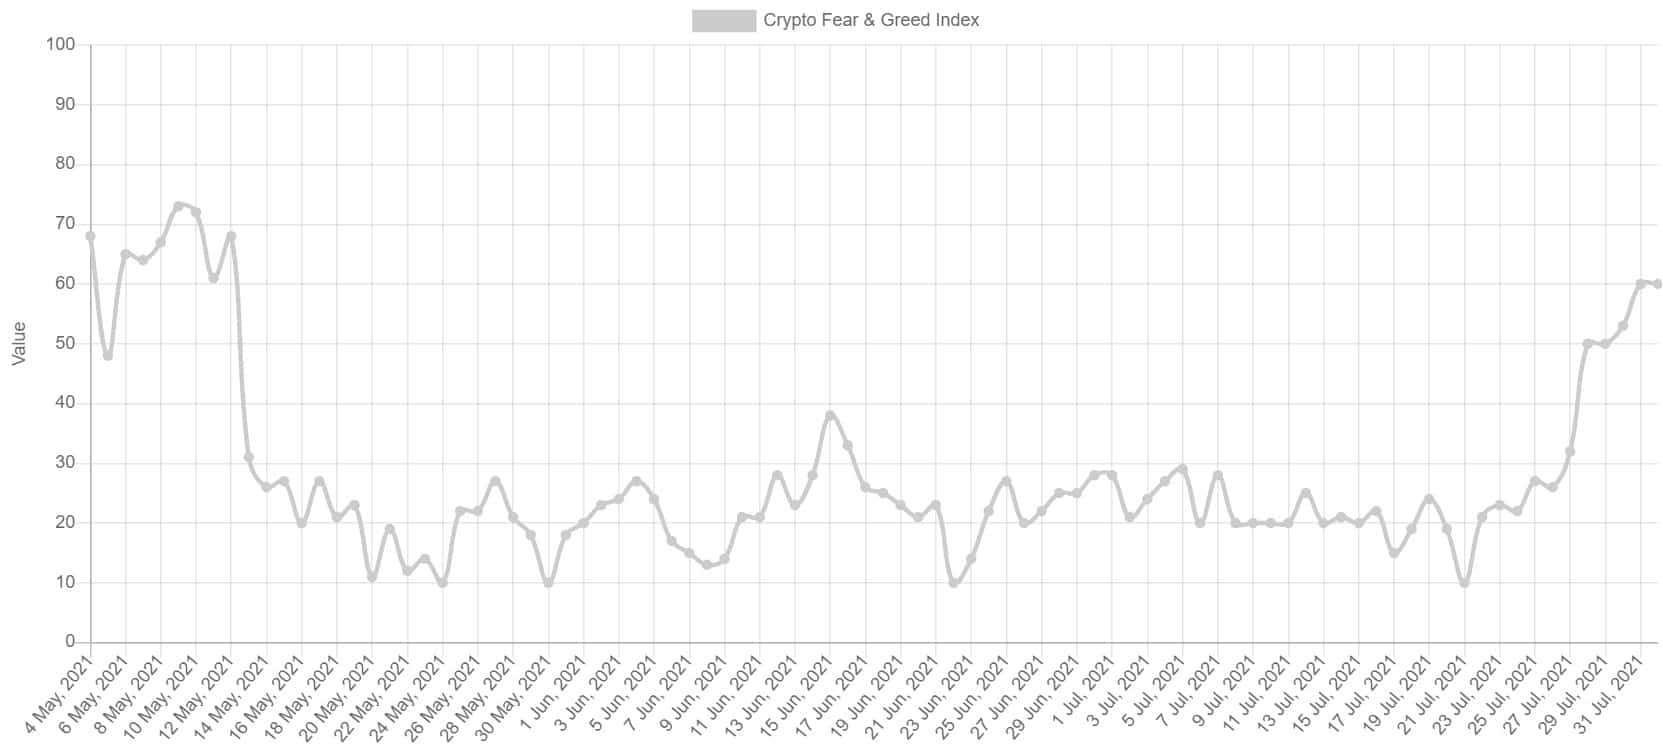 Bitcoin Fear and Greed Index Back to Greed for the First Time in 12 Weeks